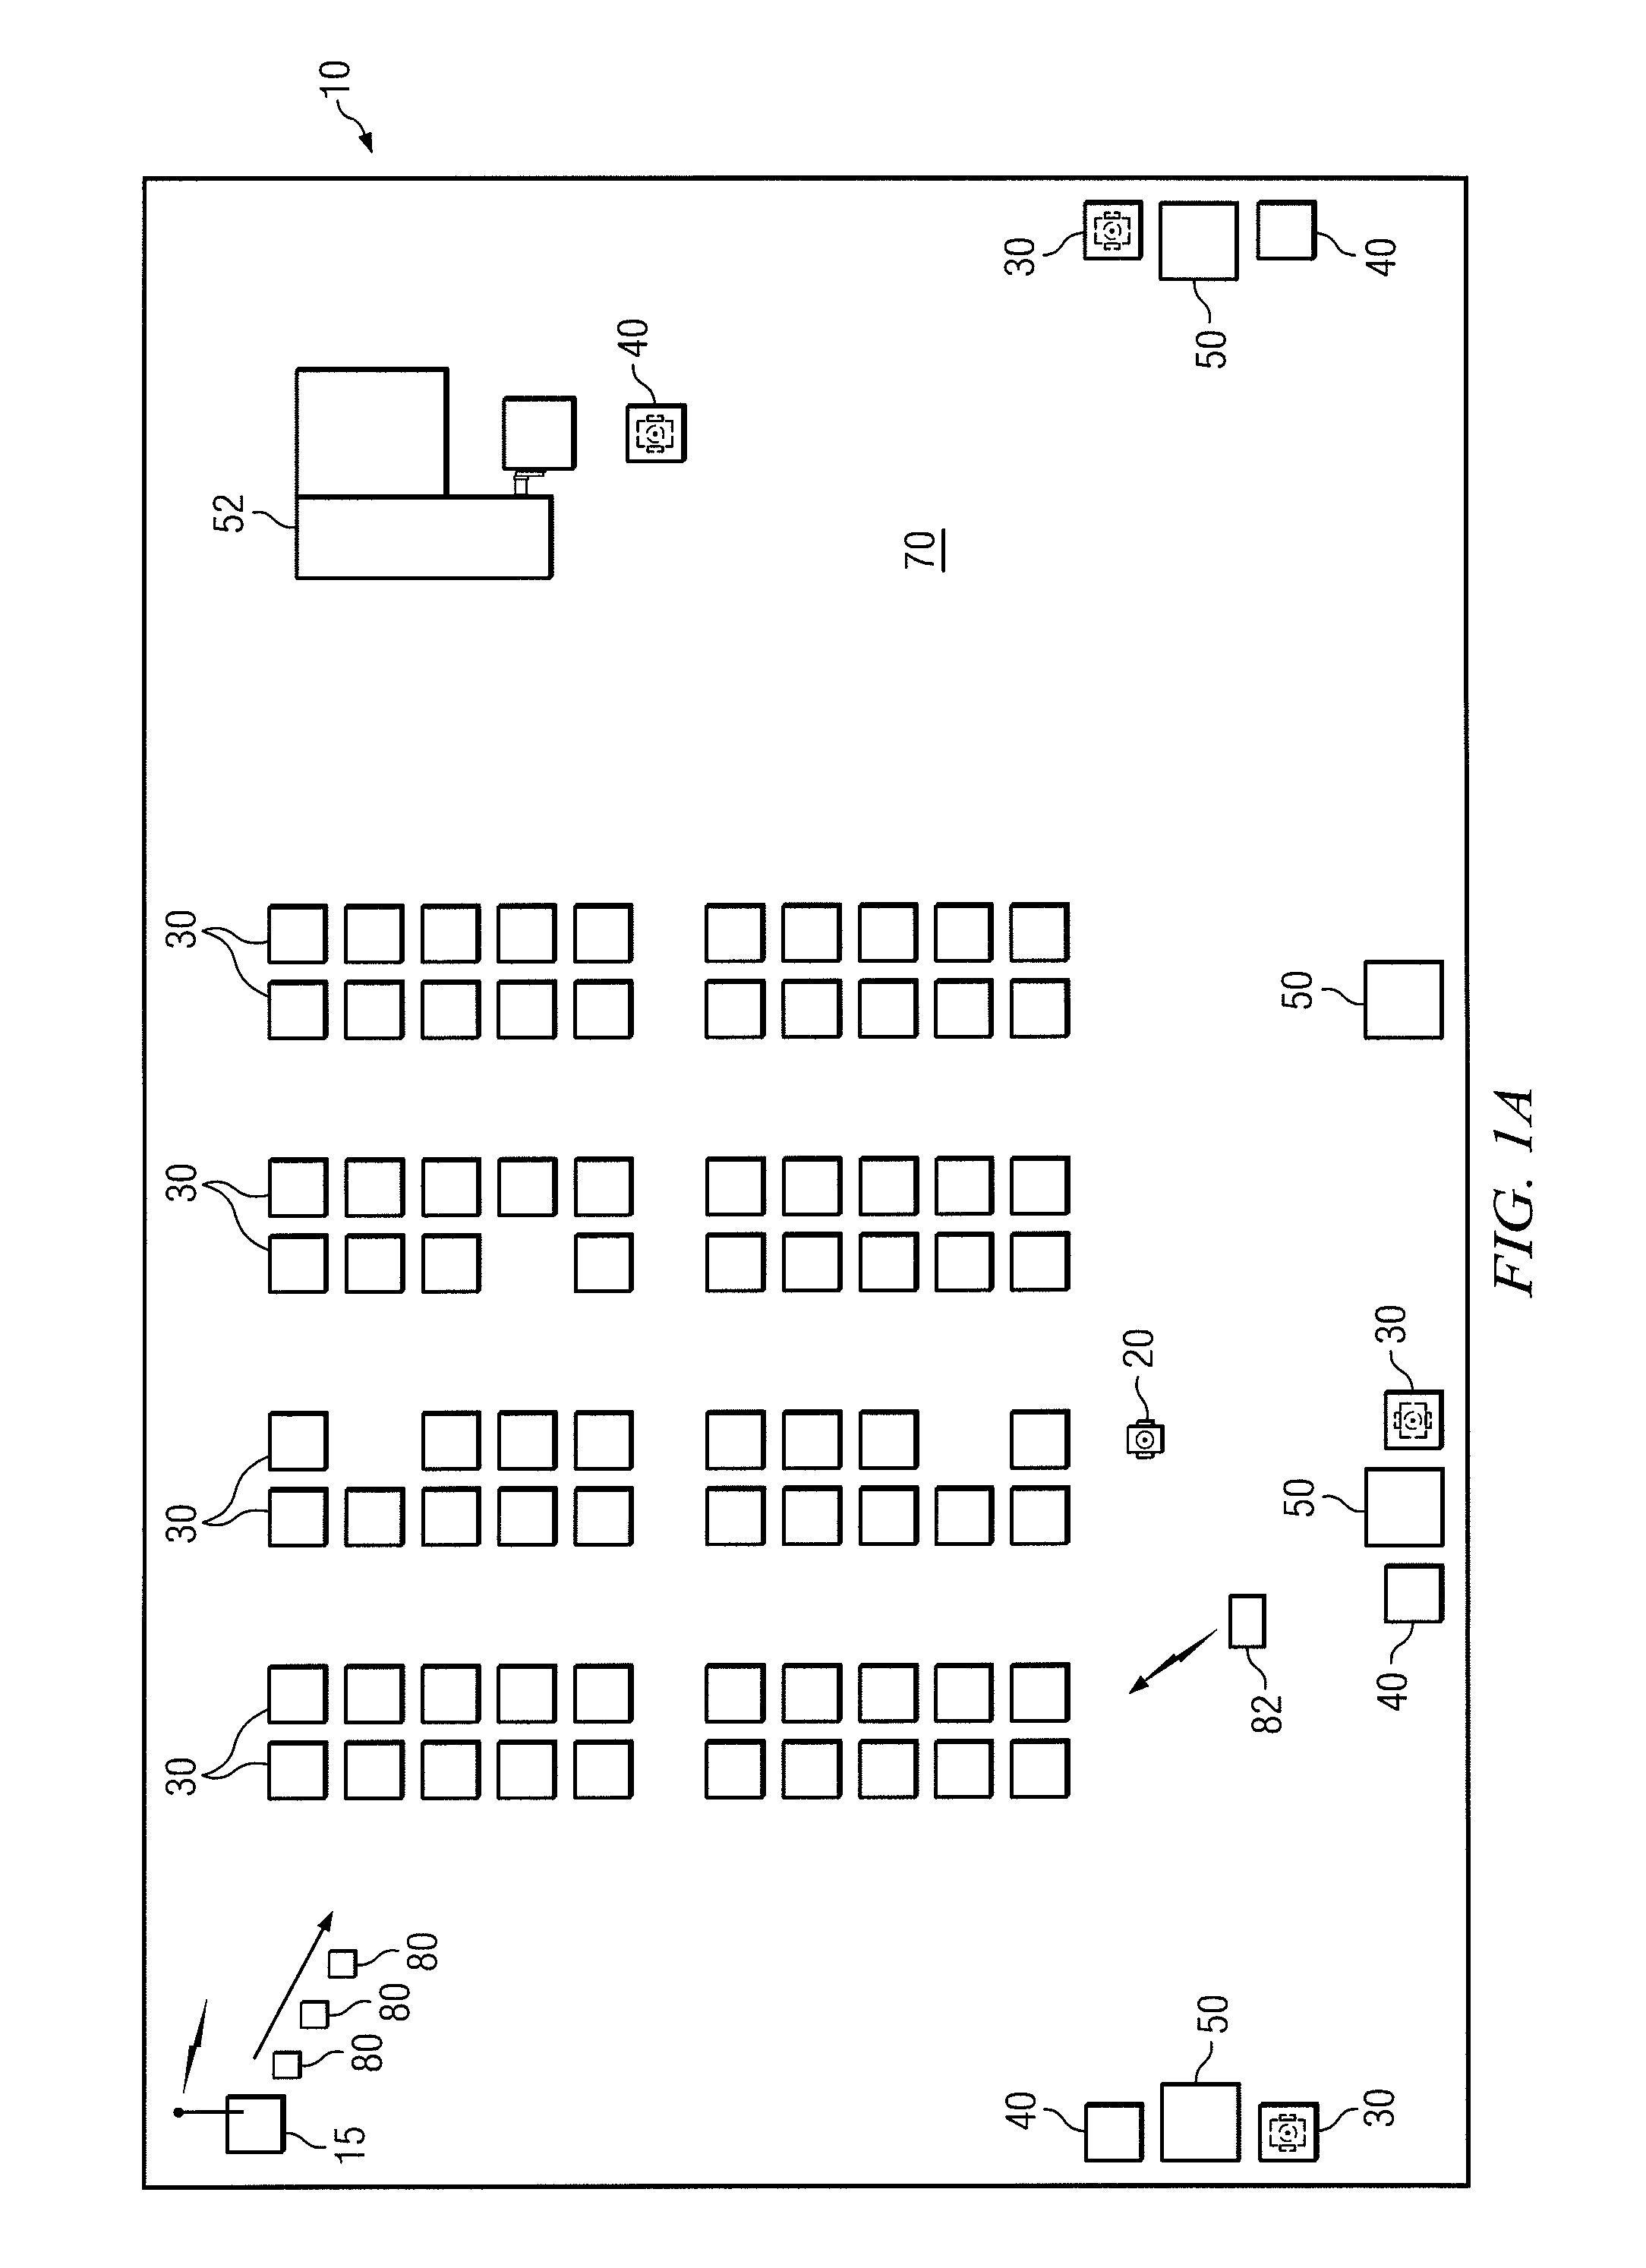 System and method for processing waste material